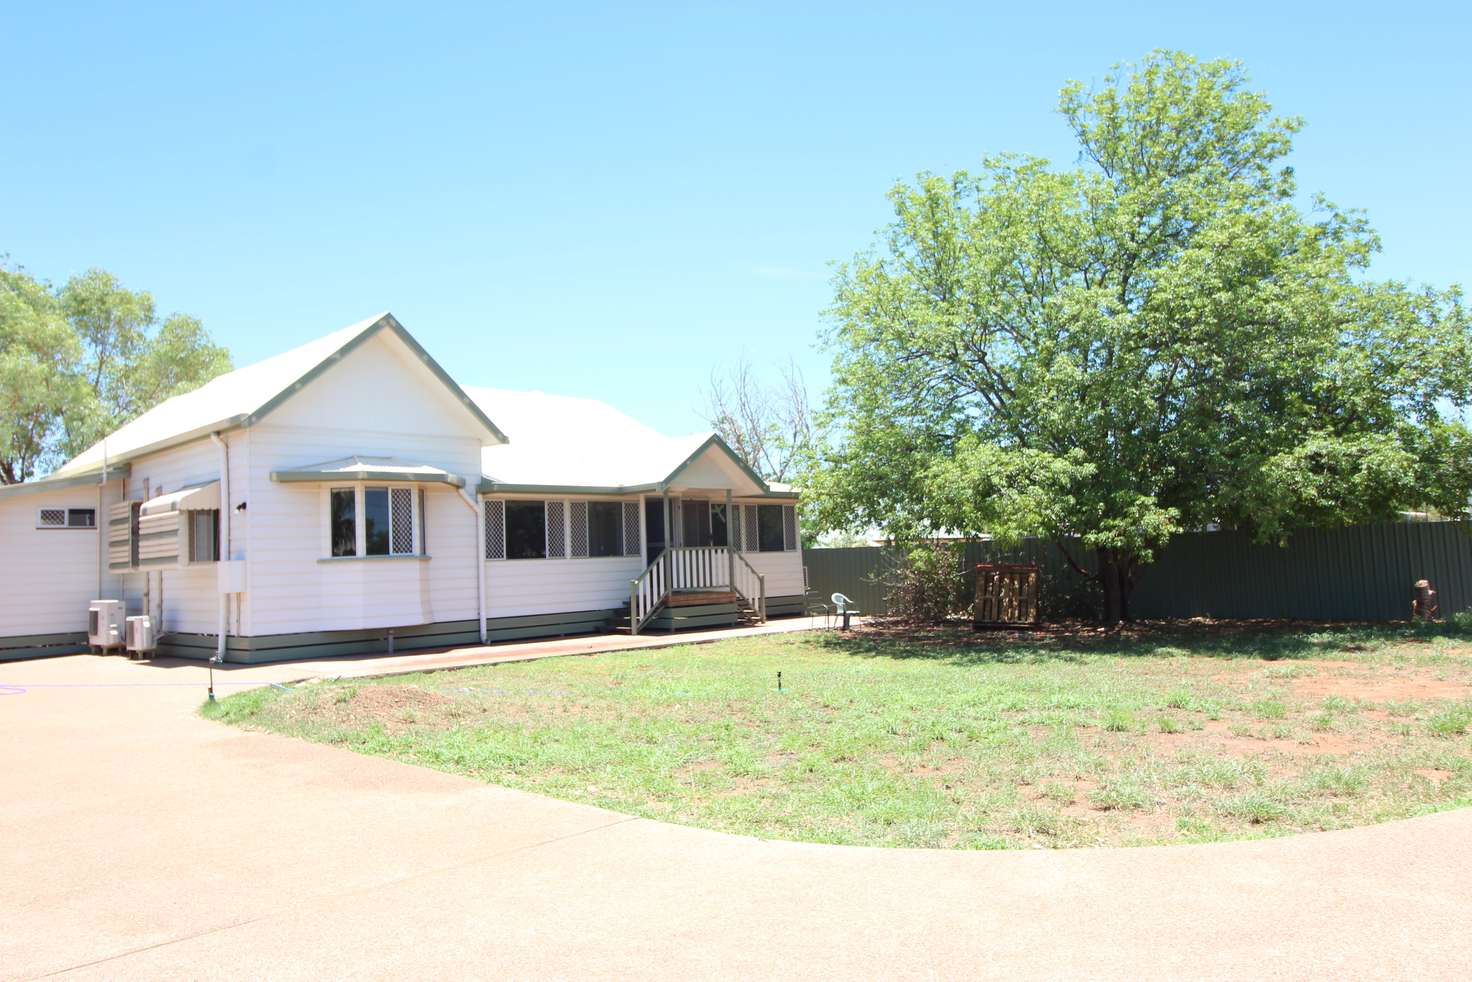 Main view of Homely house listing, 74 Eva St, Cloncurry QLD 4824